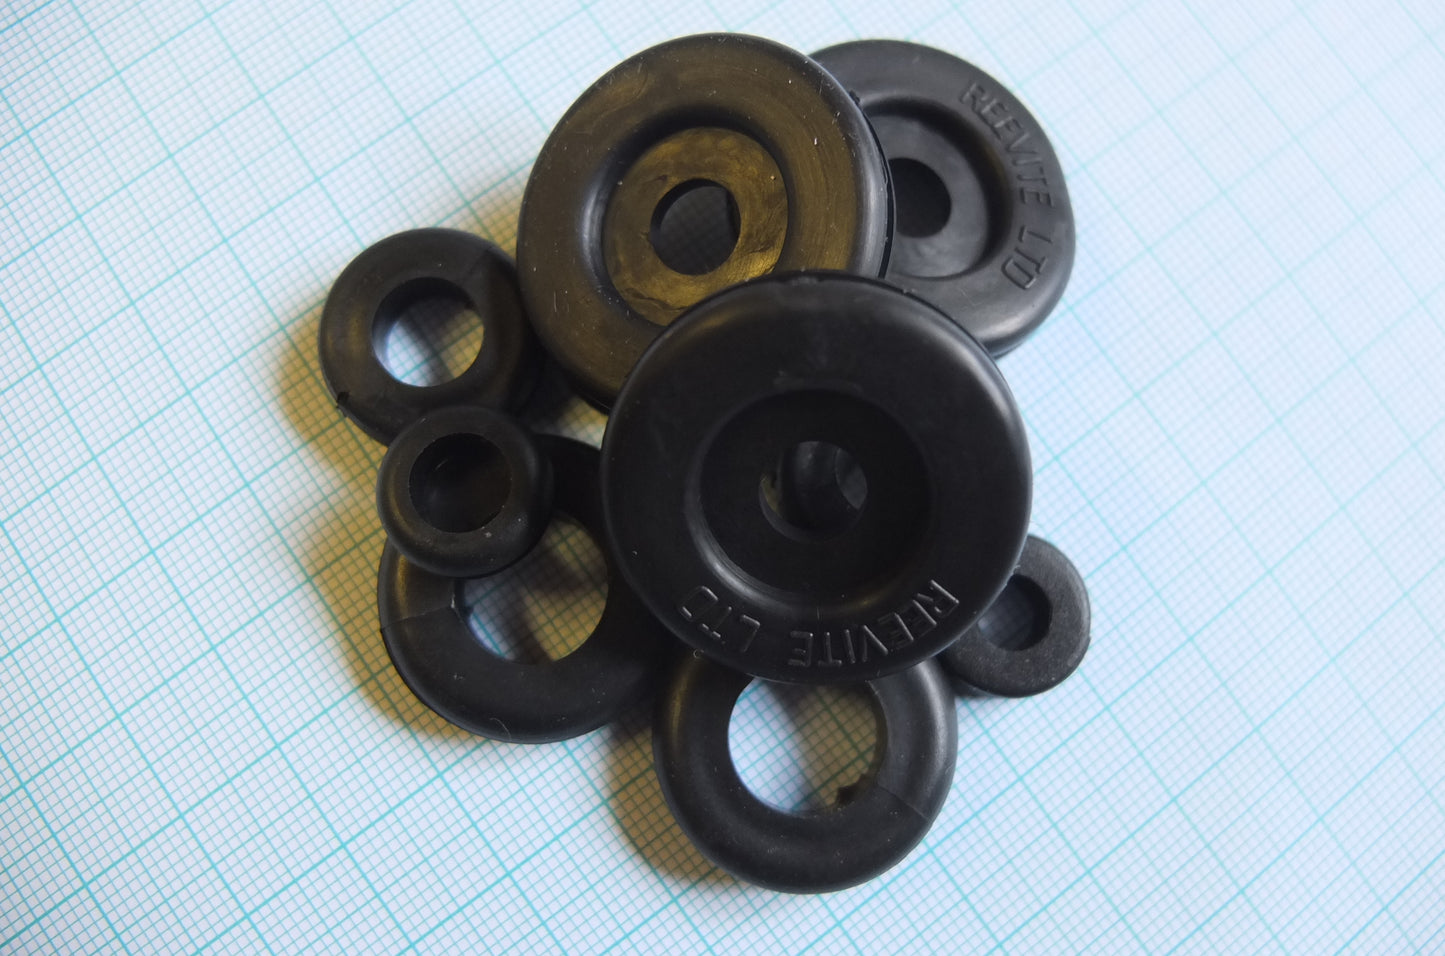 P3/083 Grommets for entire Machine